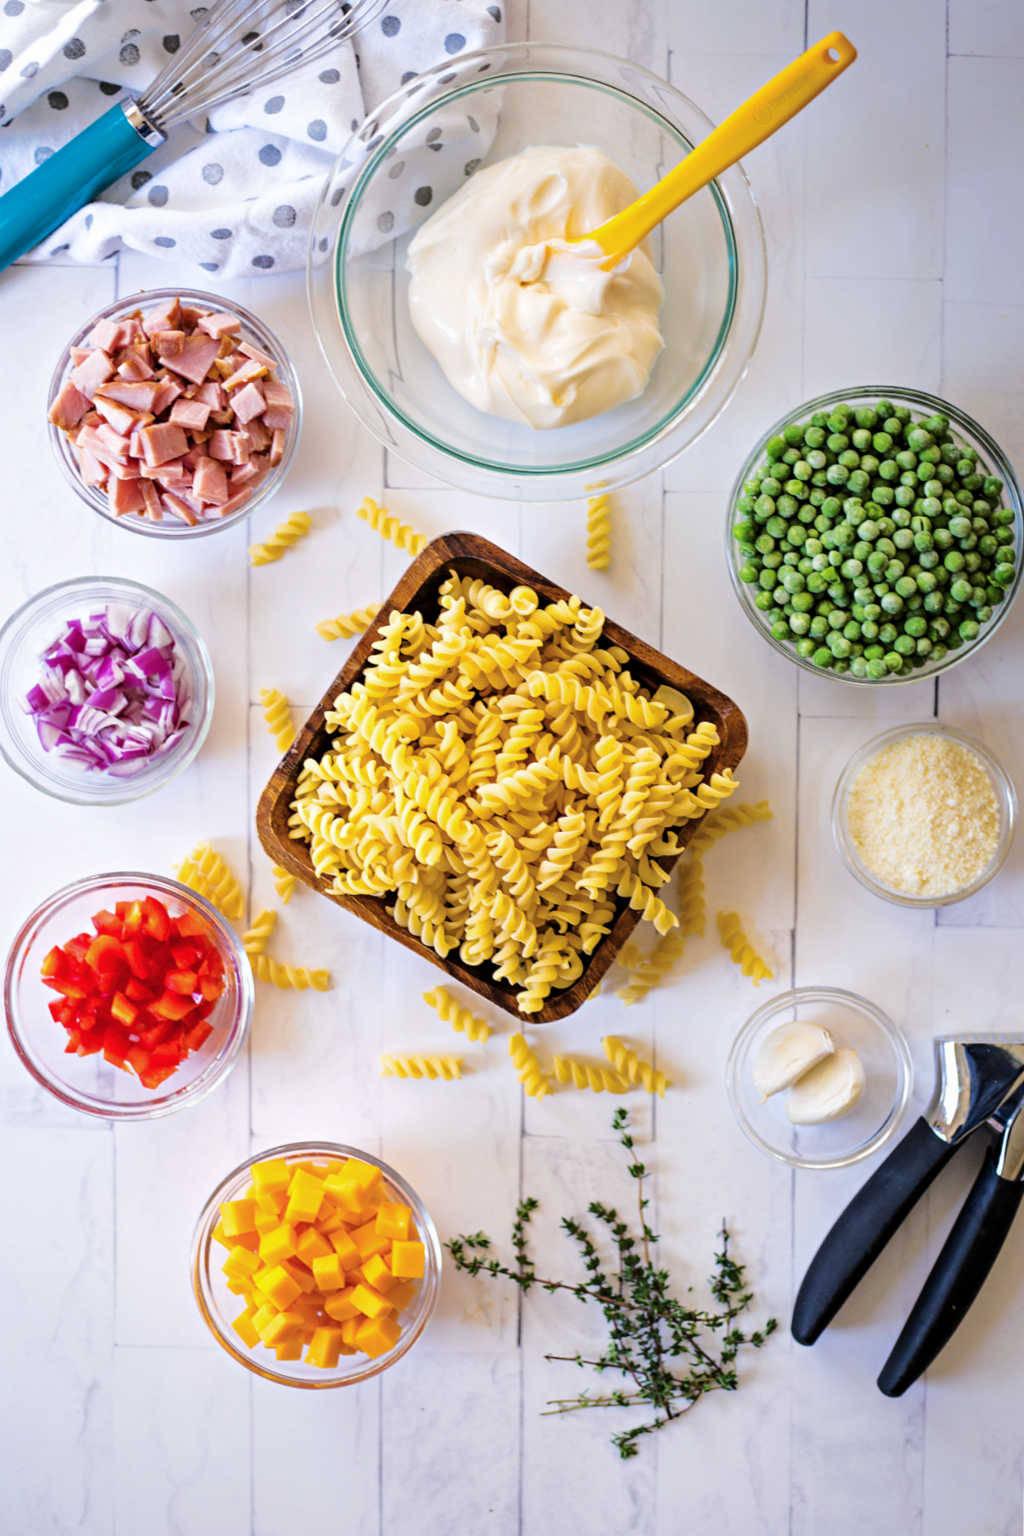 ingredients for macaroni salad with peas on a table.